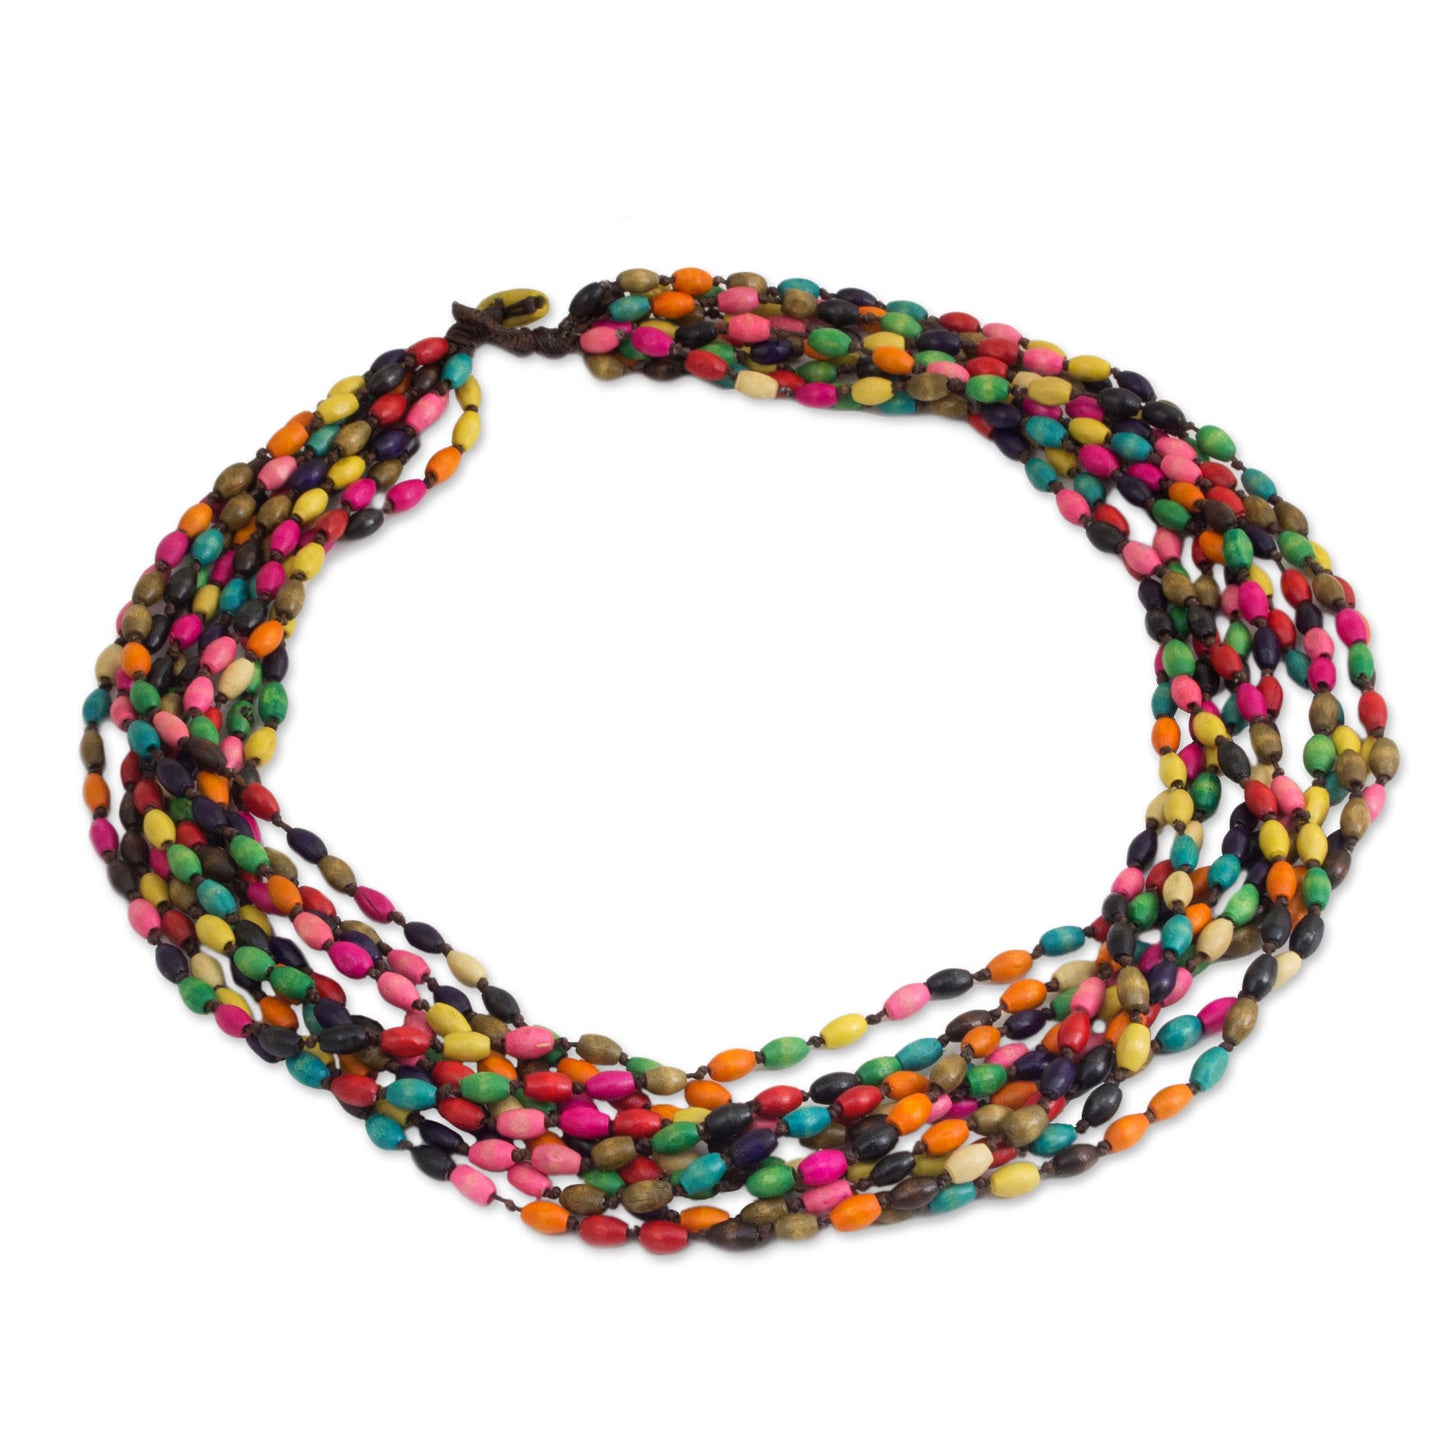 Songkran Belle Layered Necklace